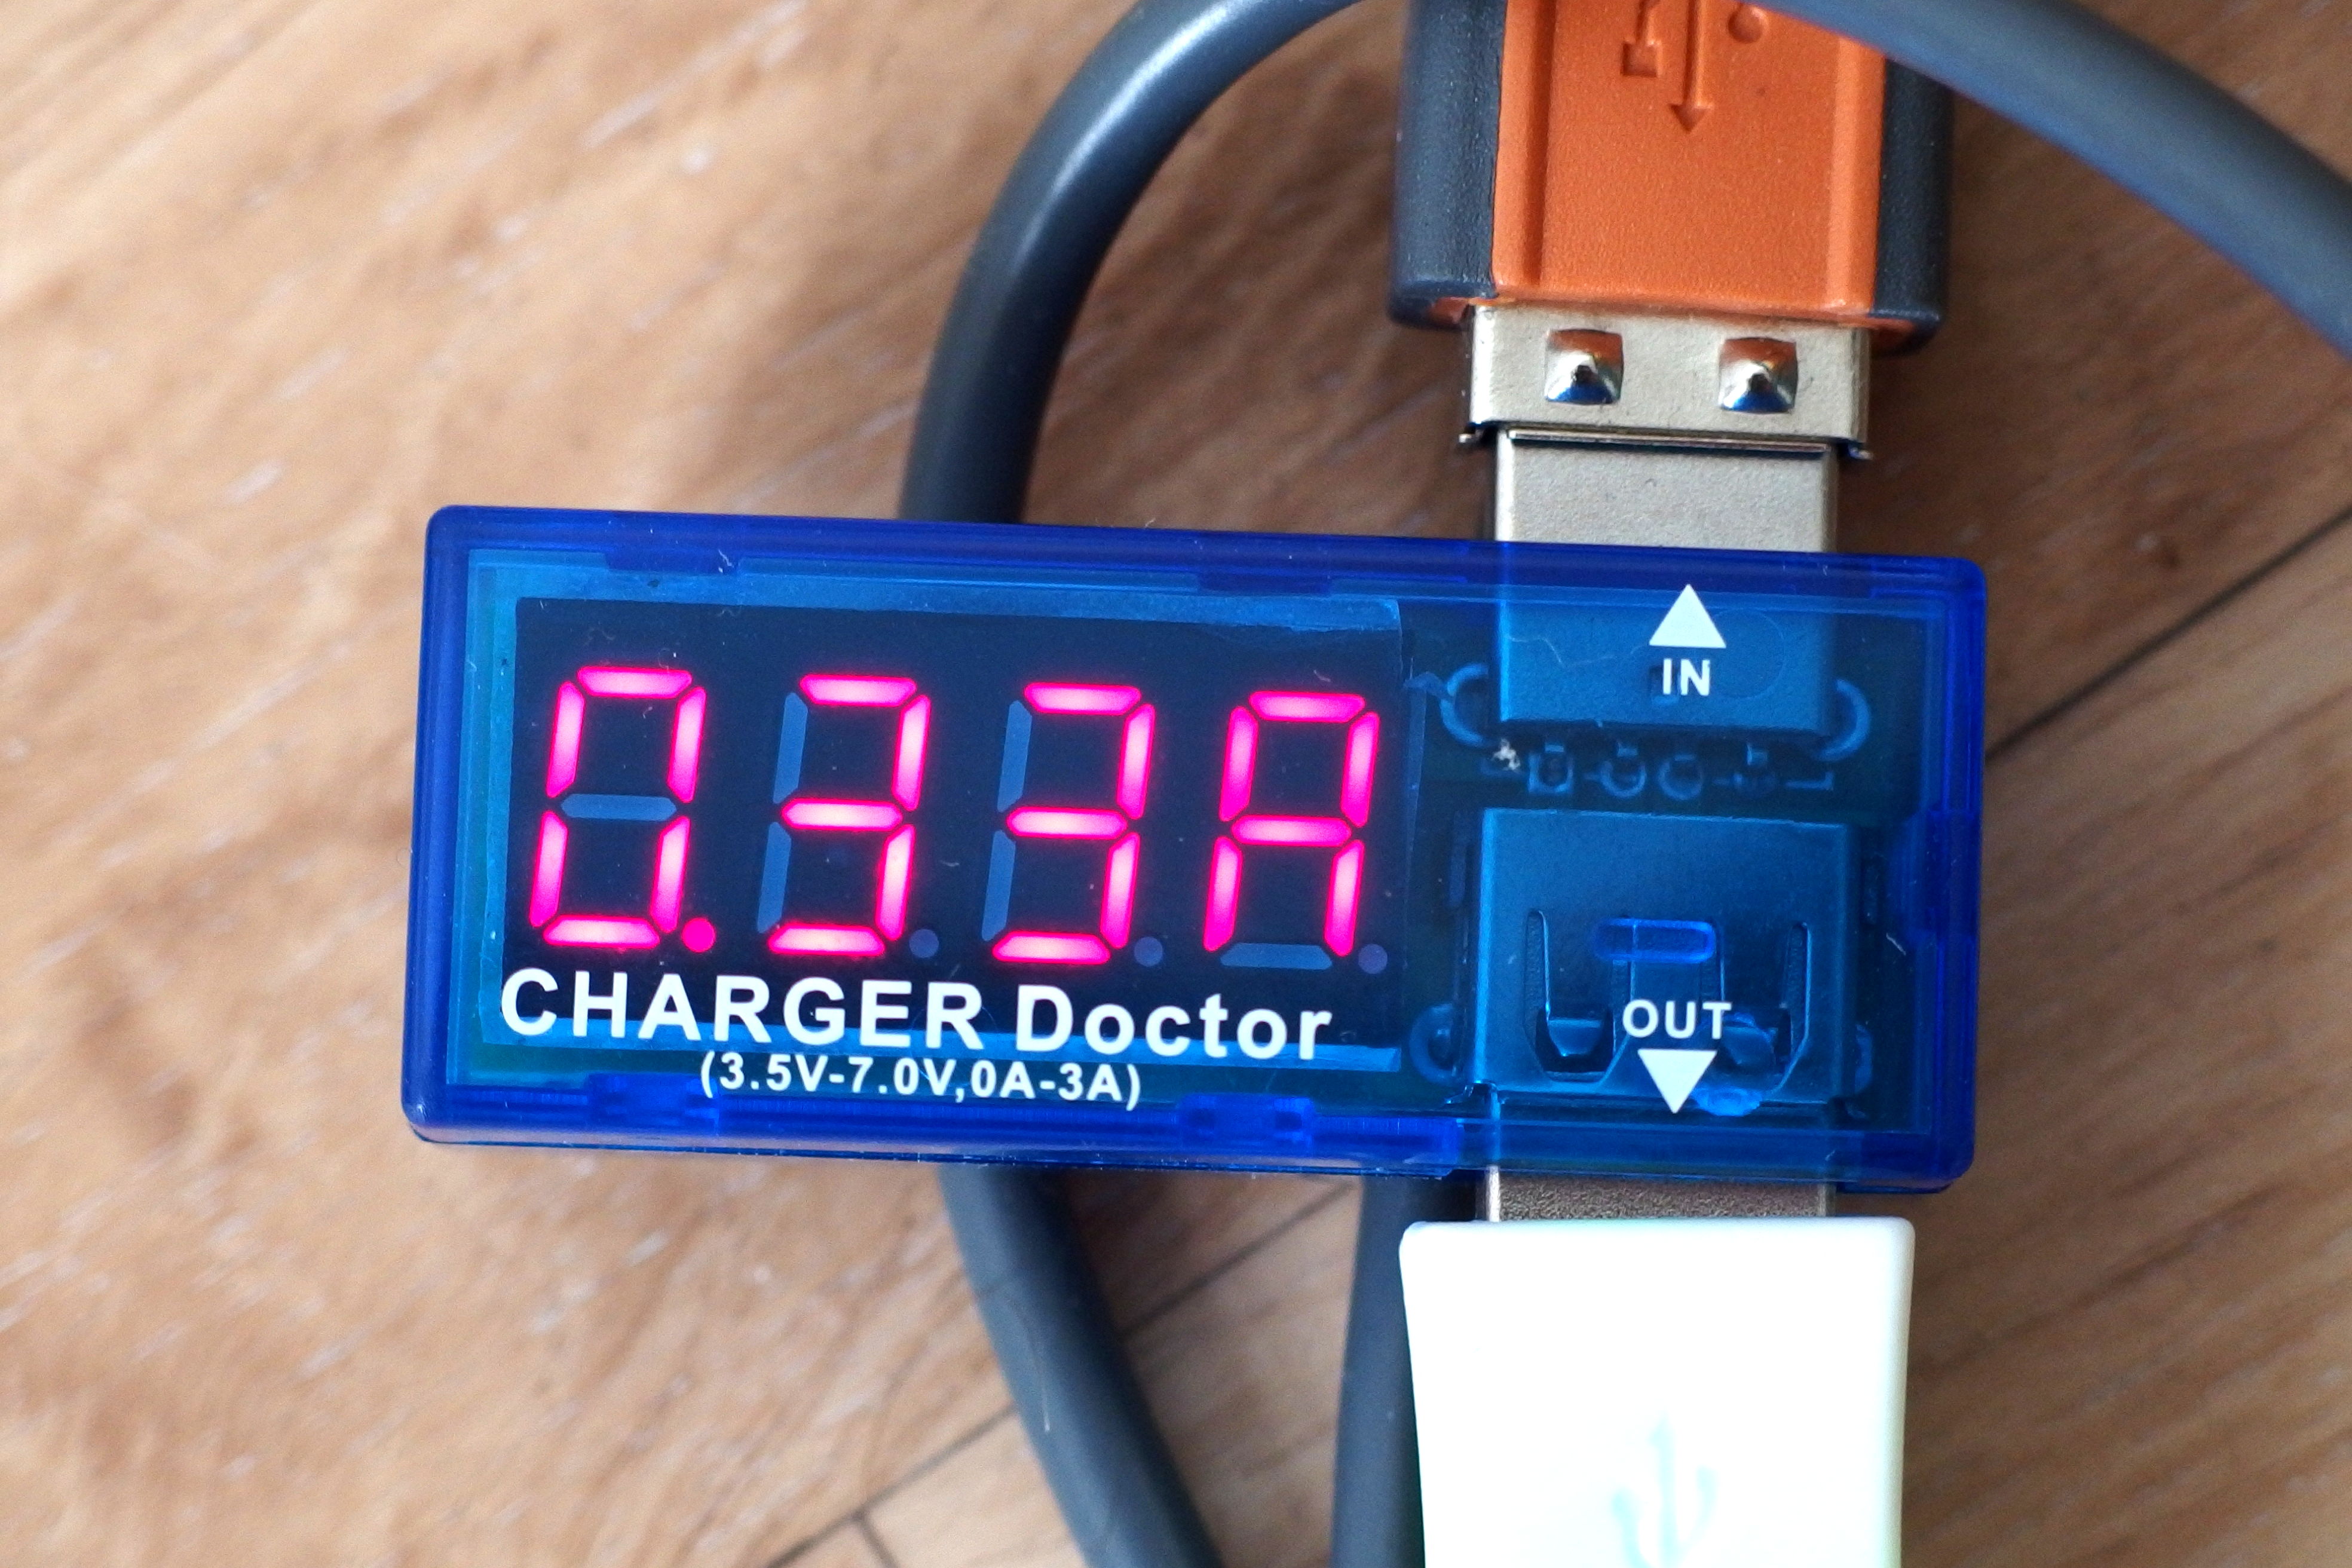 File:Charger-doctor.jpg